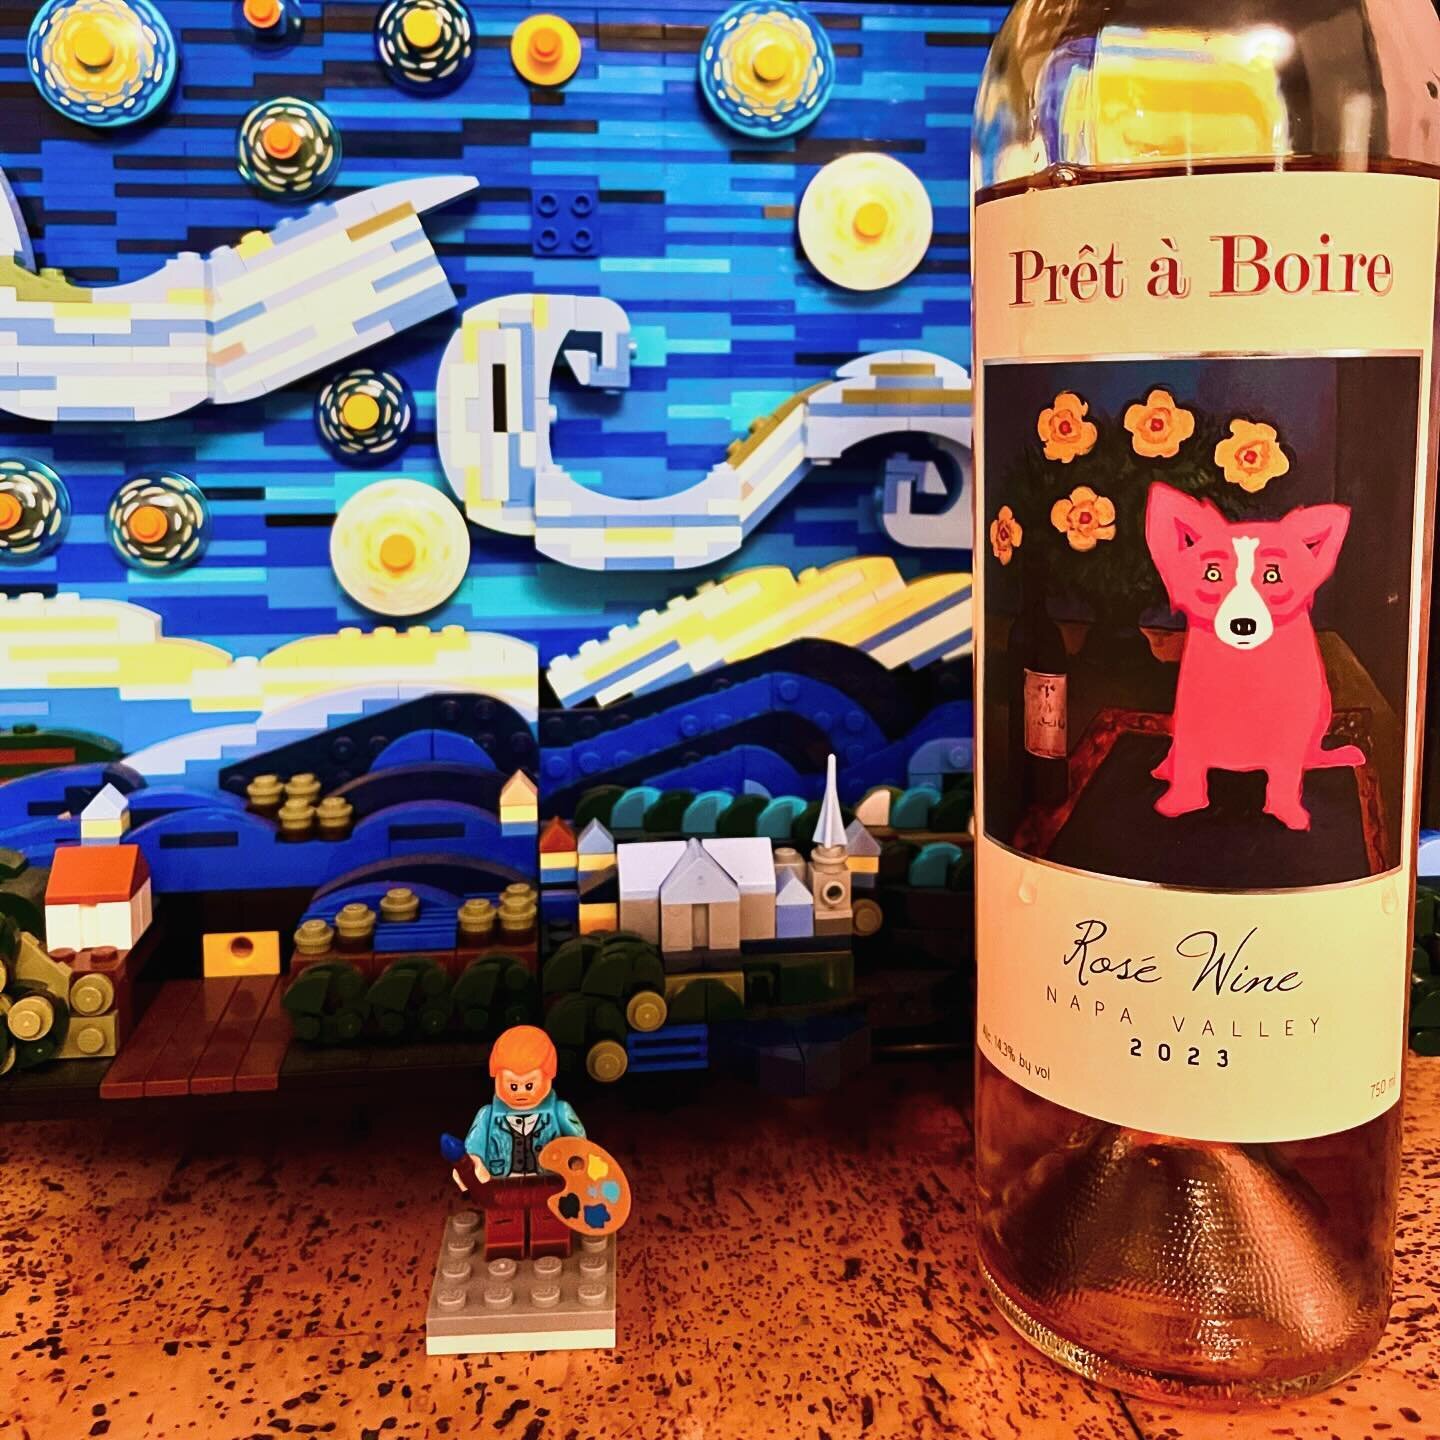 One more bag to go deserves a glass of pink joy from a generous soul. Happy Sunday friends. 💖
@lego 
#starrynight